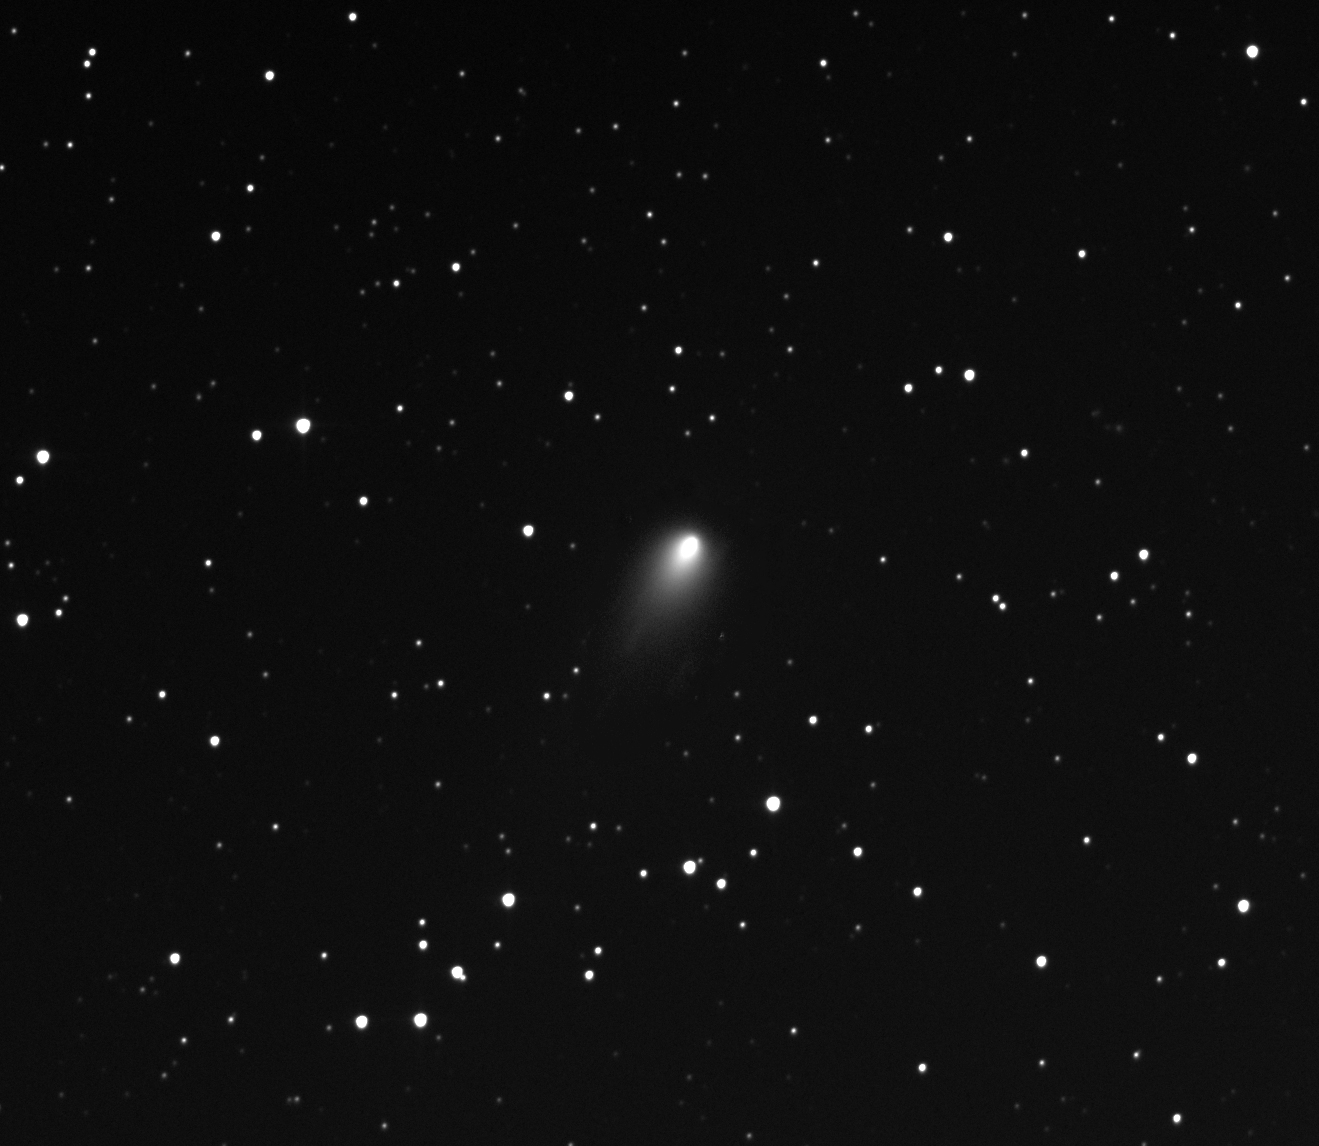 Comet 168P/Hergenrother (Cropped)